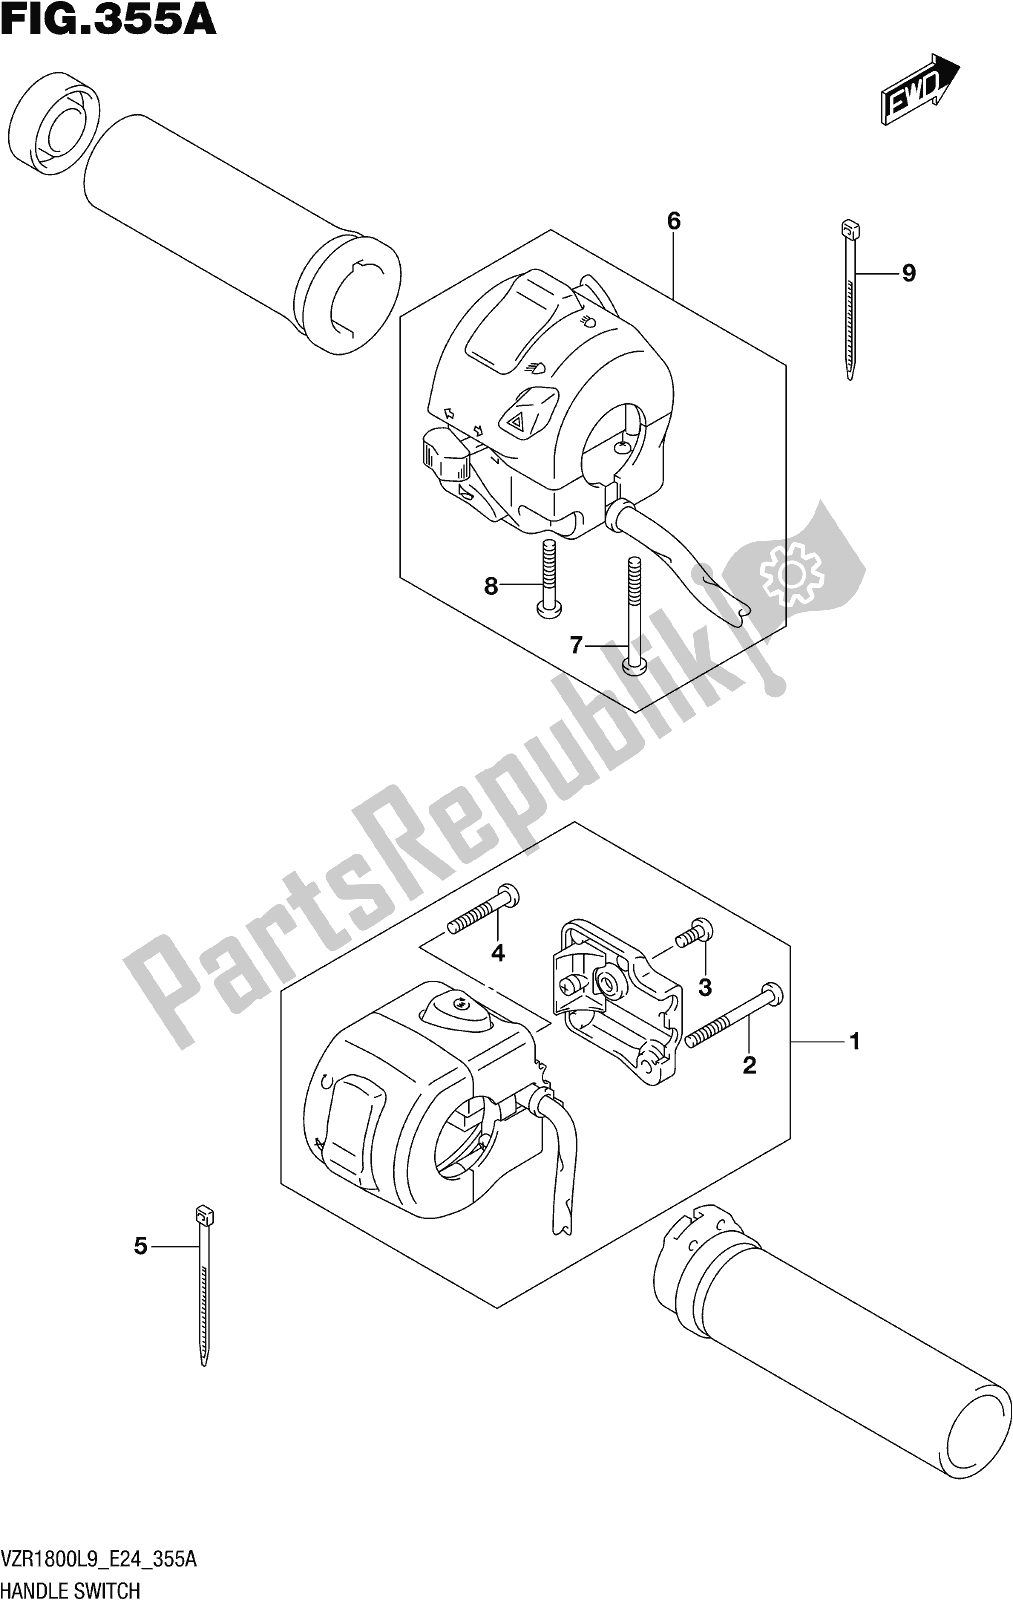 All parts for the Fig. 355a Handle Switch (vzr1800l9 E24) of the Suzuki VZR 1800 2019